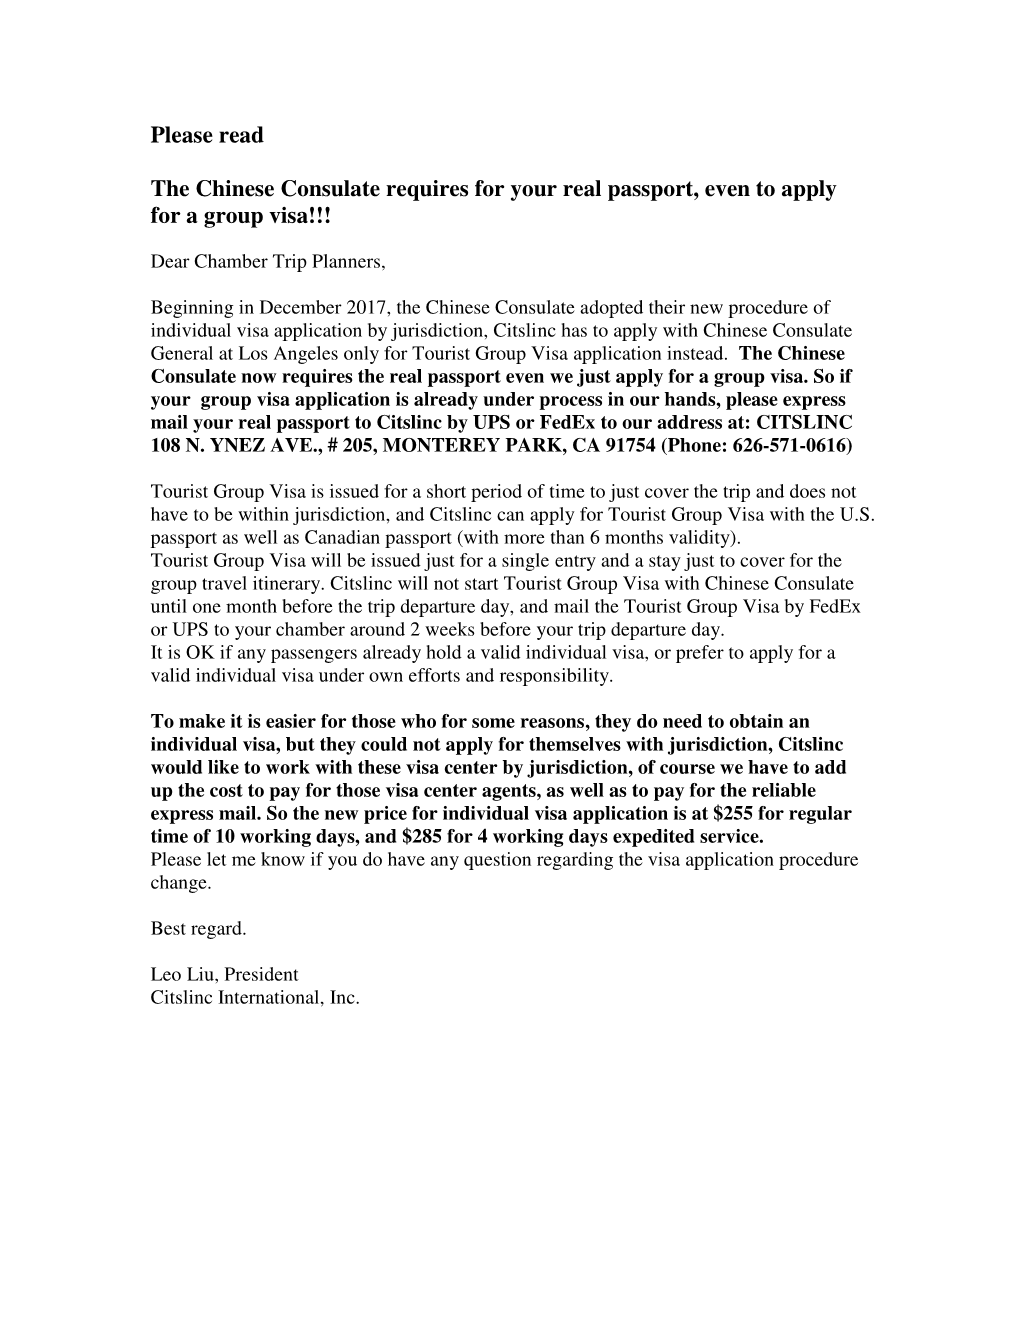 Please Read the Chinese Consulate Requires for Your Real Passport